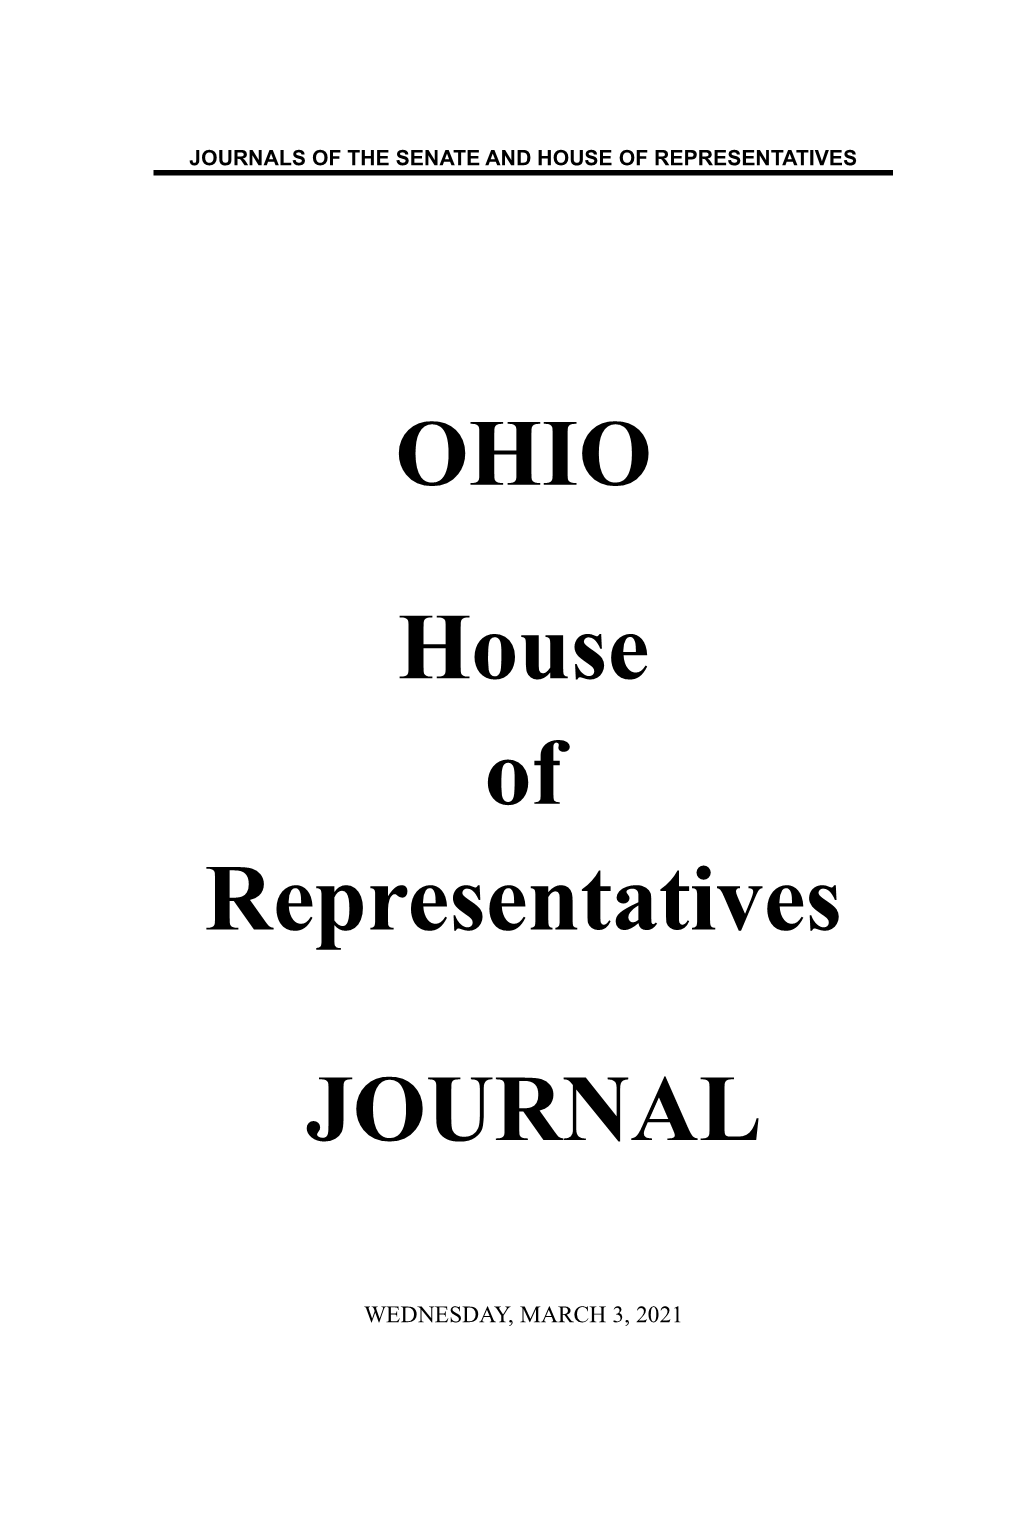 March 3, 2021 228 House Journal, Wednesday, March 3, 2021